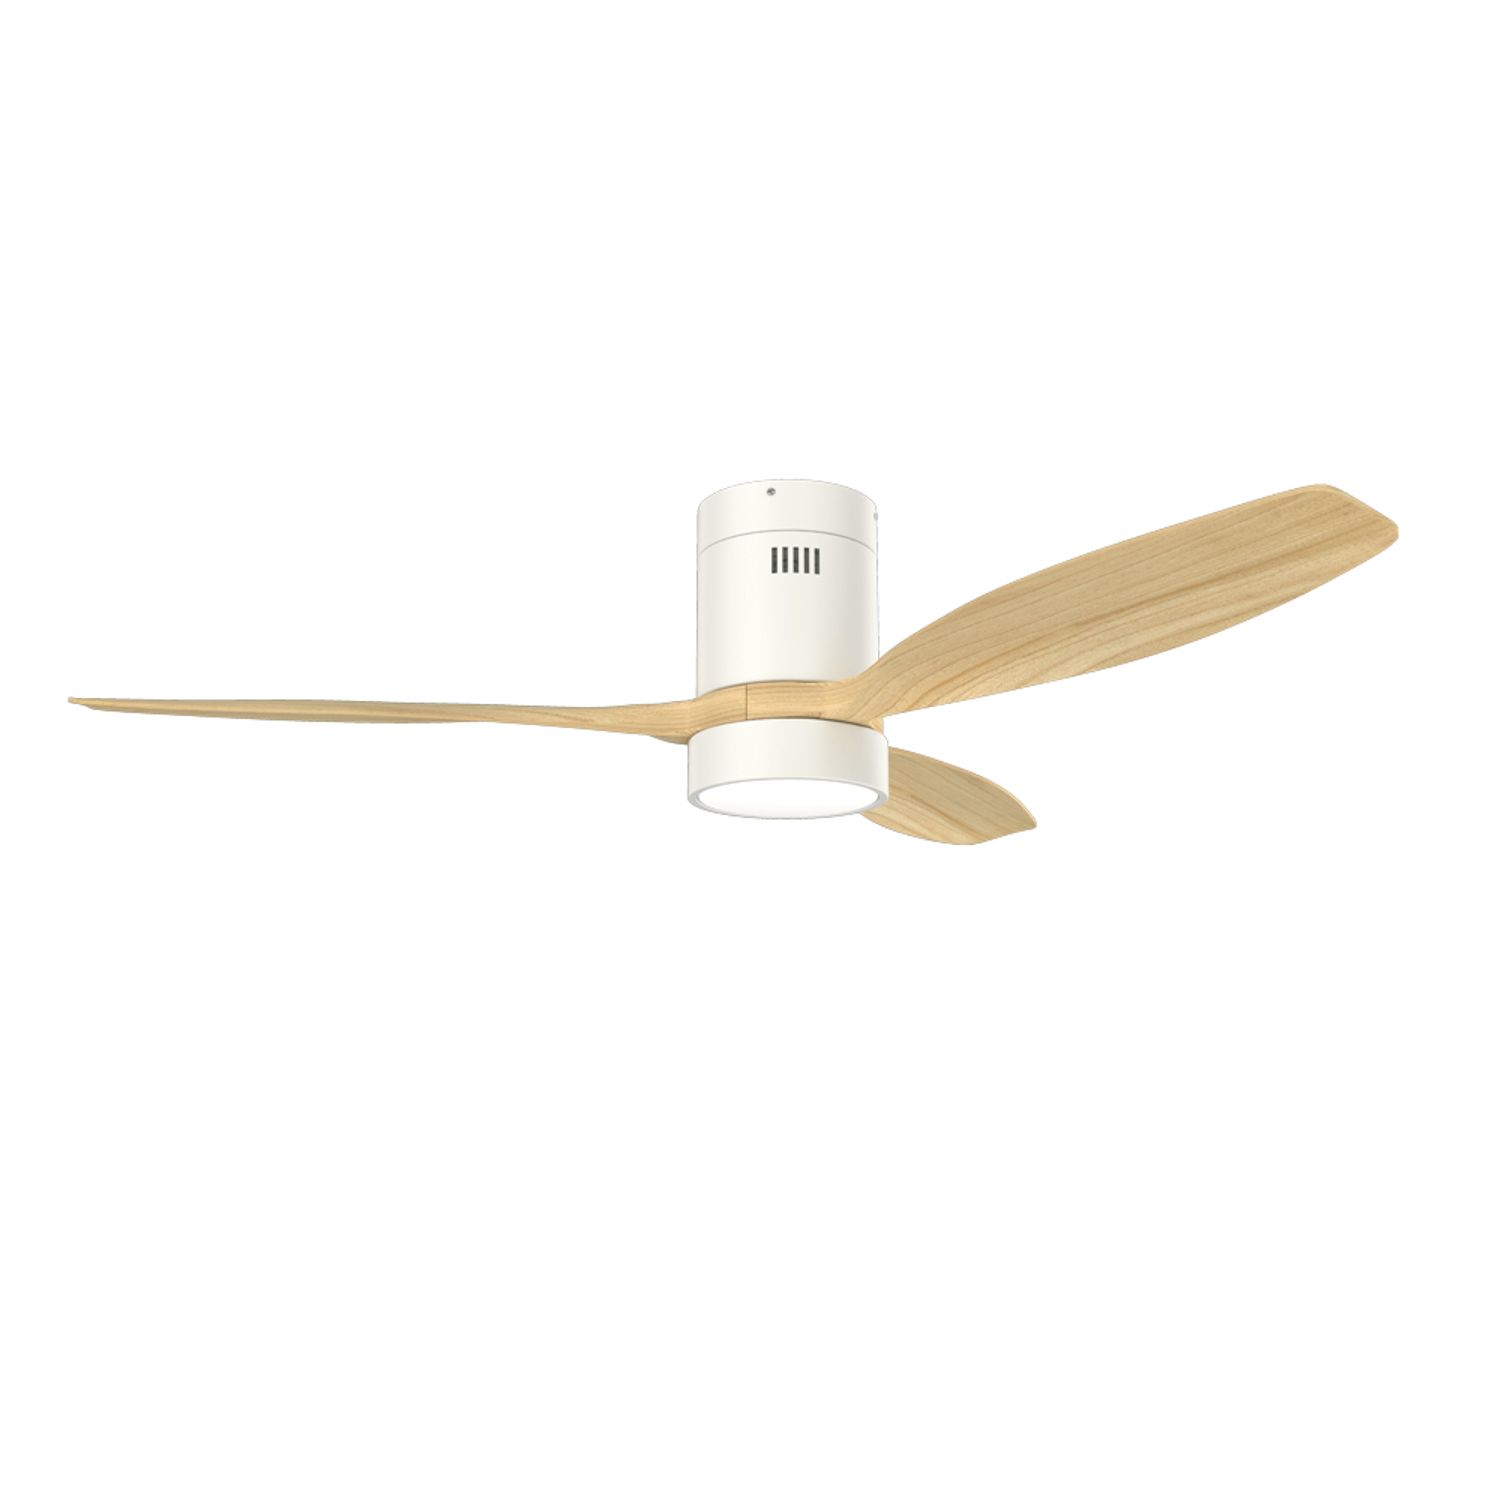 KBS White and Wood blade Indoor Ceiling Fan with Lights and Remote